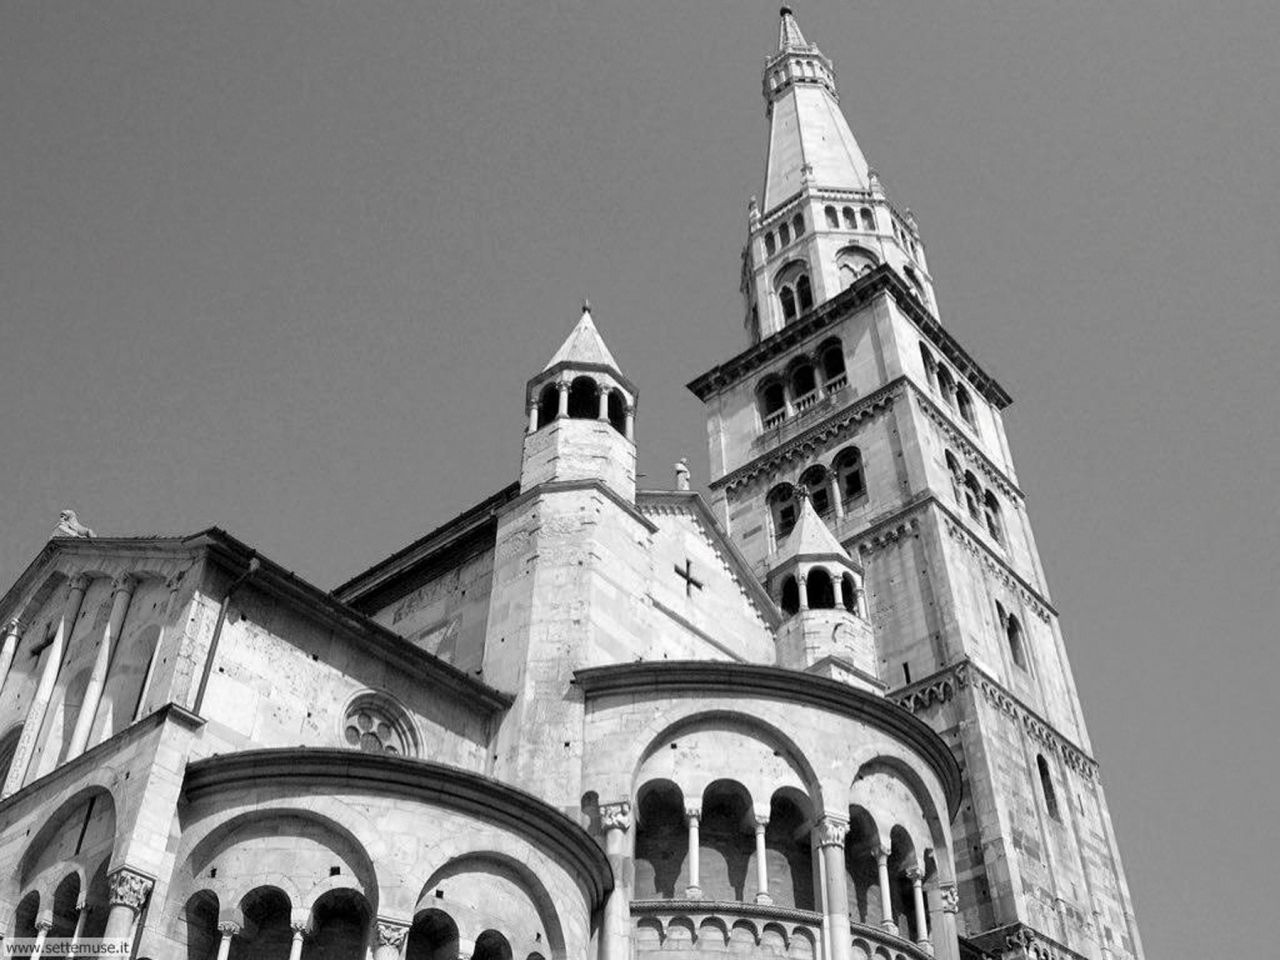 The bell tower of the Cathedral of Modena is a symbol of the town, visible from all directions outside the city borders.